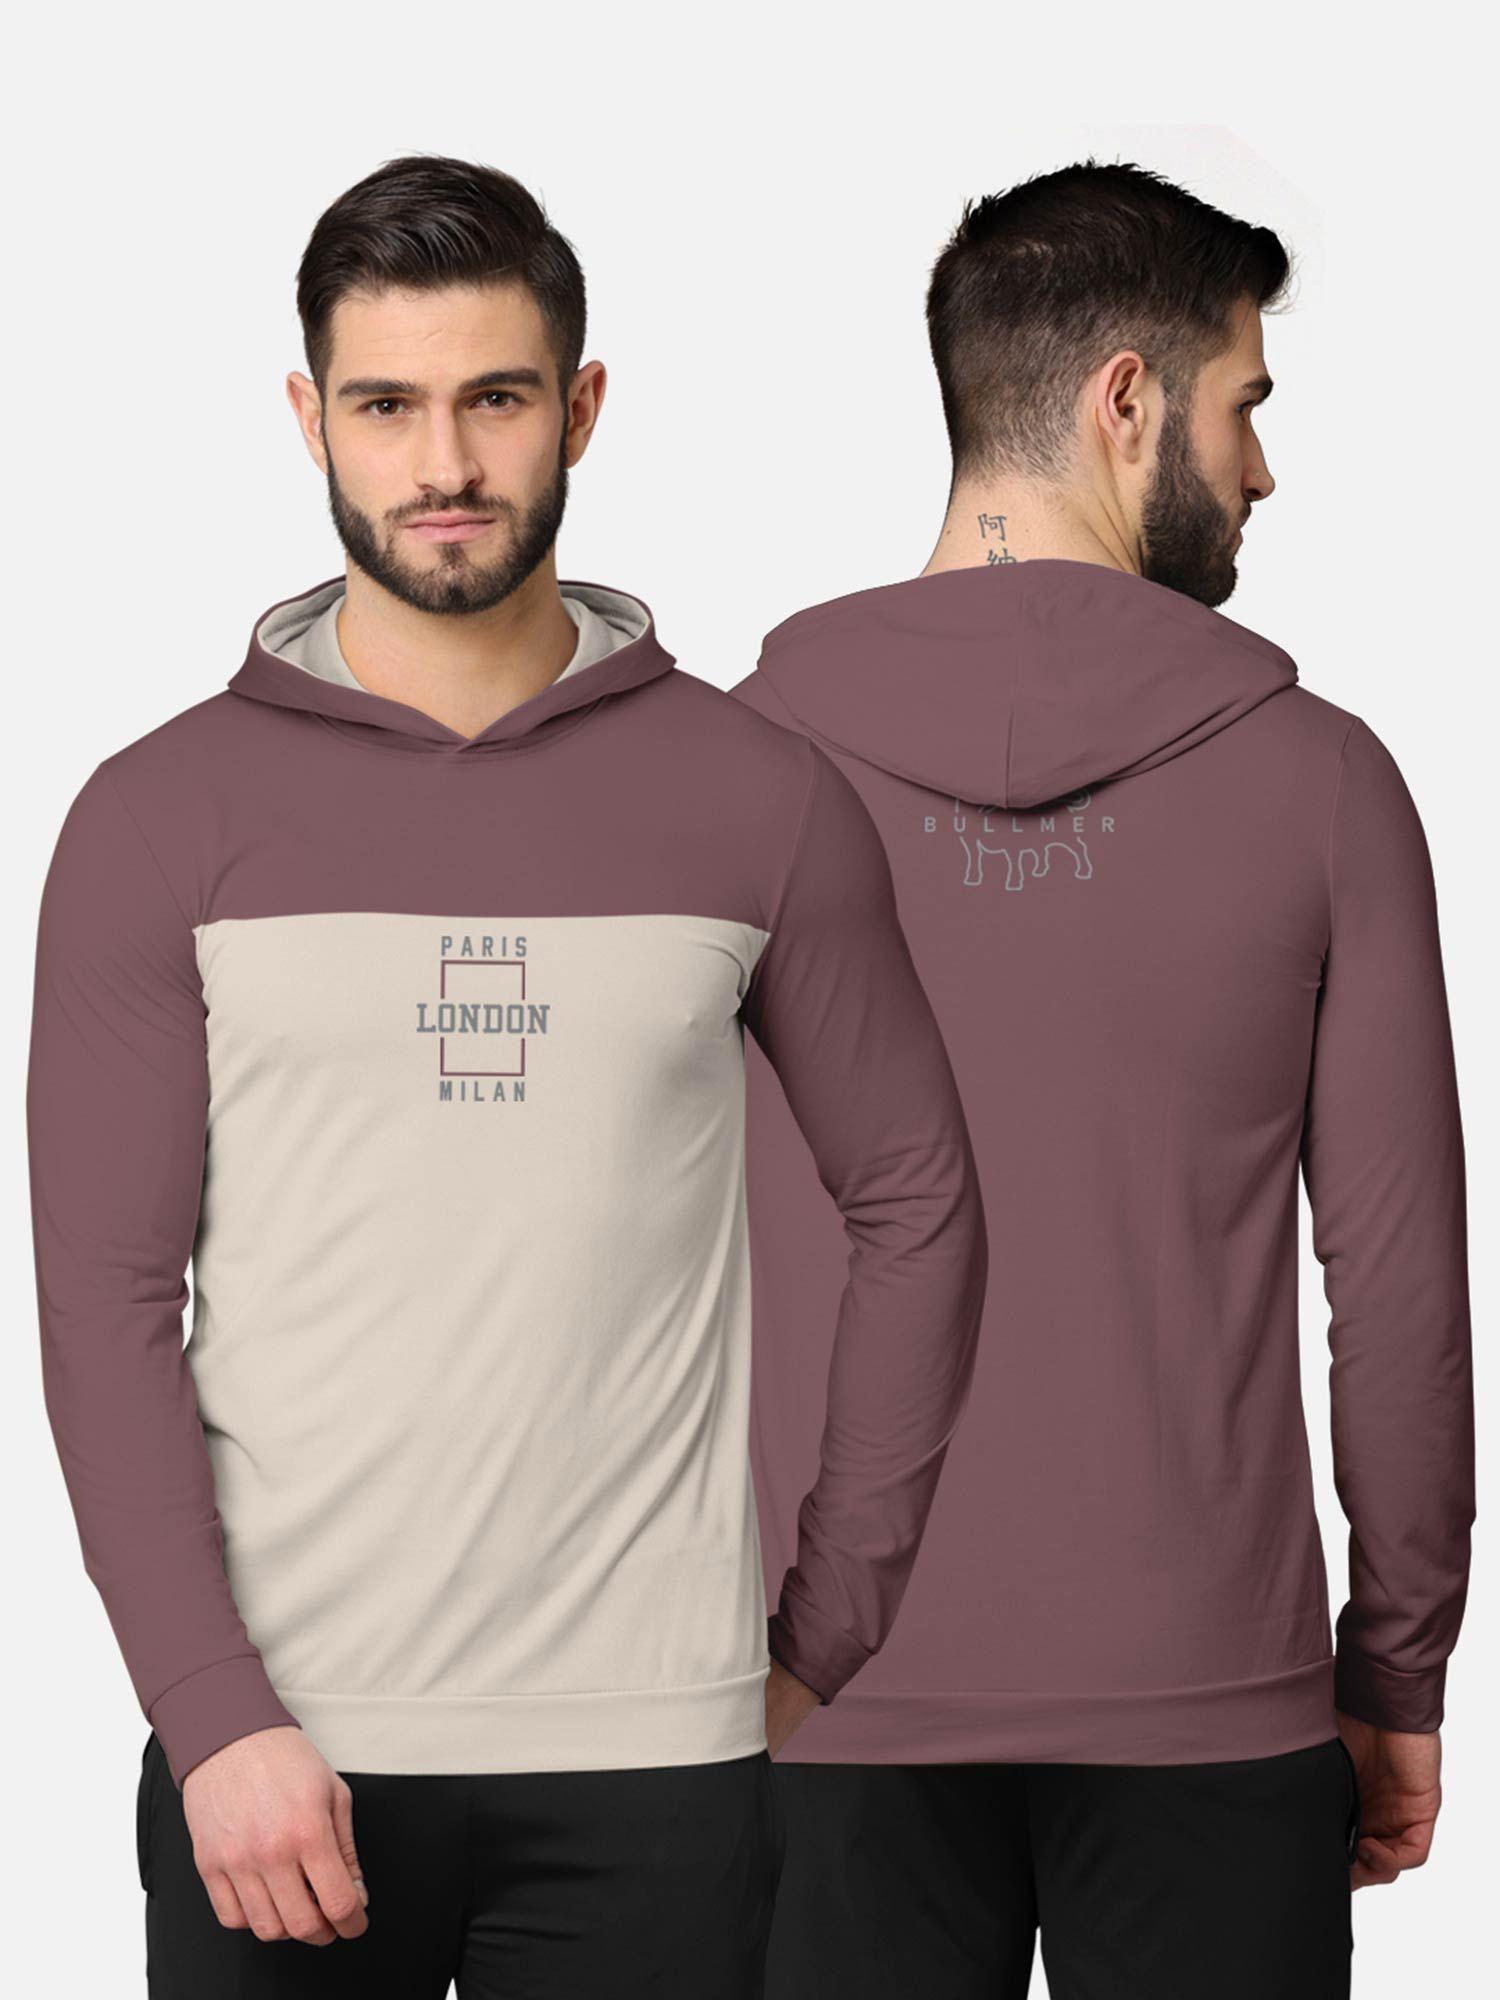 colorblock full sleeve hooded t-shirt for men purple and beige